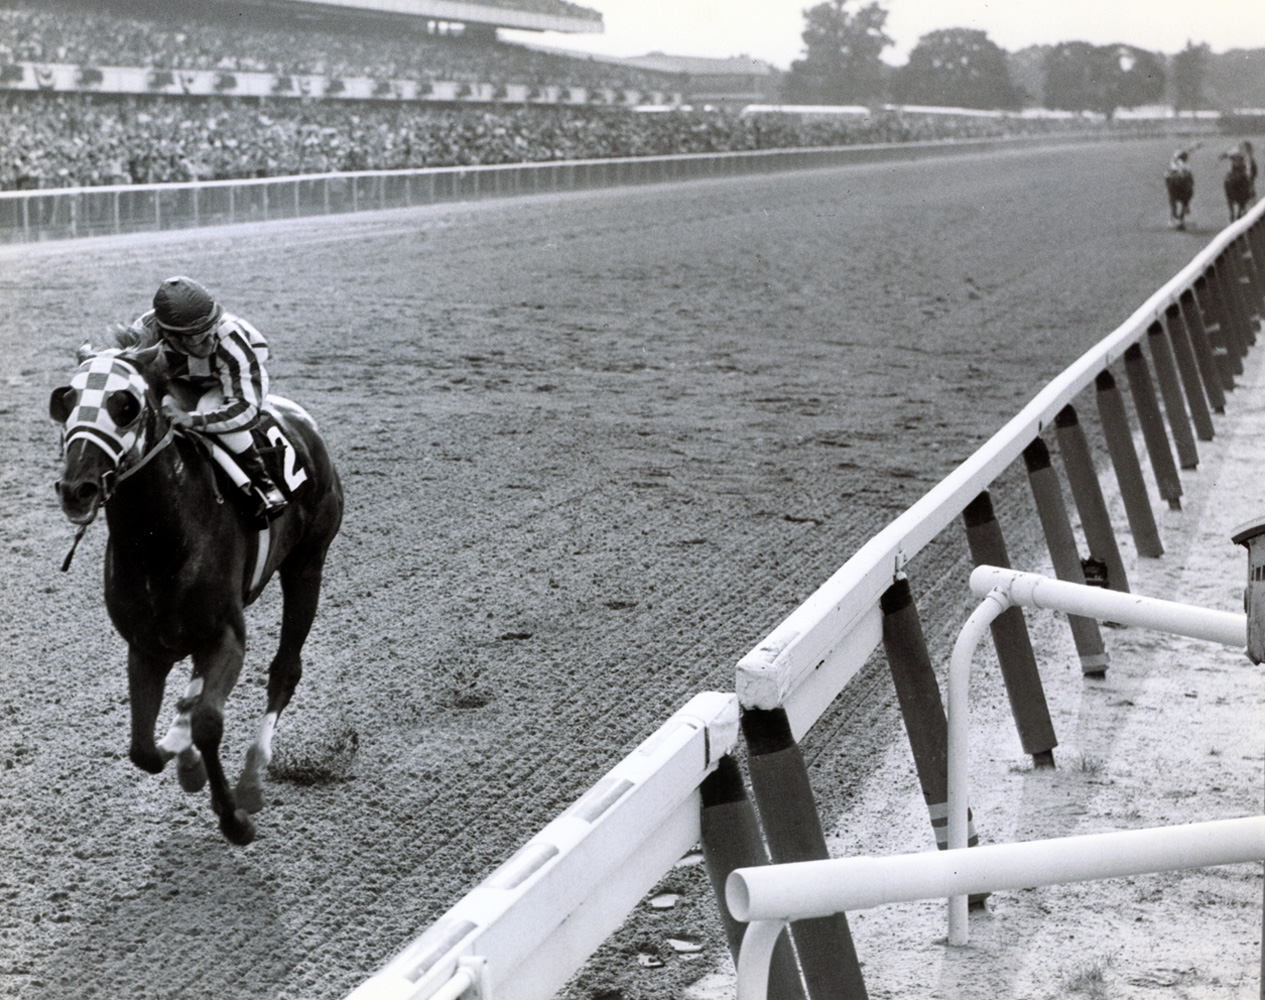 Ron Turcotte and Secretariat winning the 1973 Belmont Stakes and Triple Crown by a record-breaking 31 lengths (Bob Coglianese/Museum Collection)